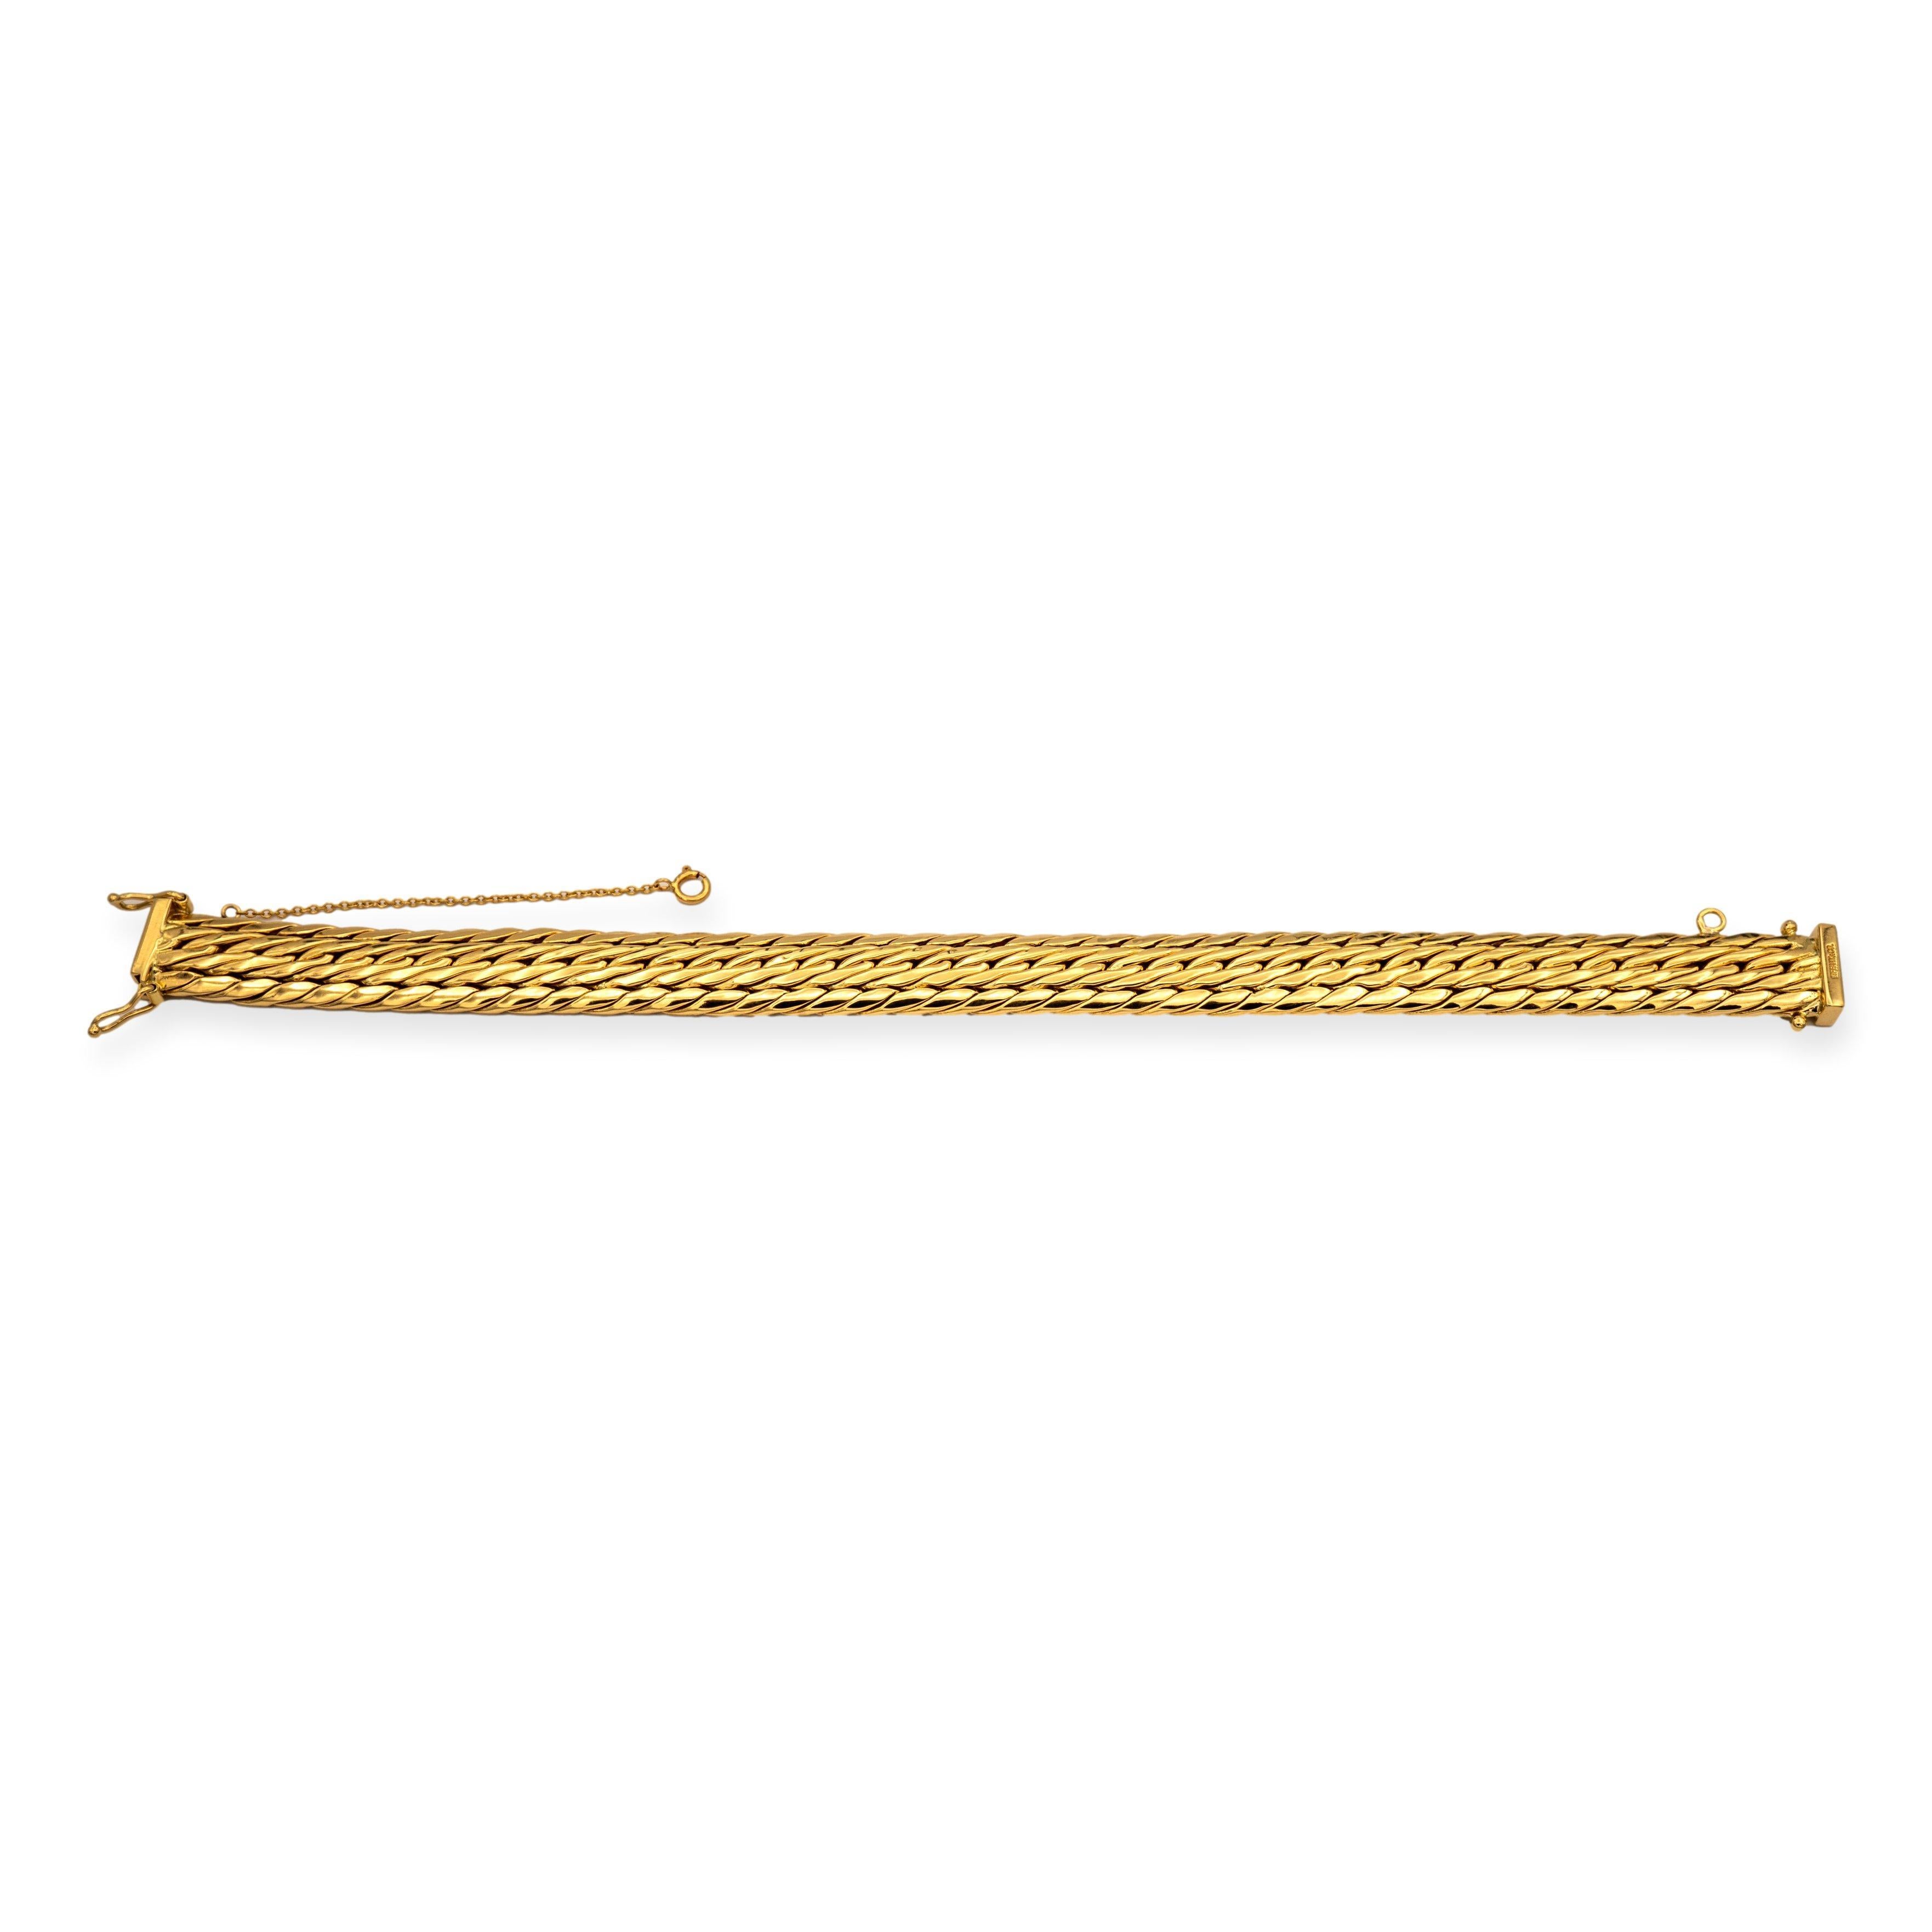 Vintage Tiffany & Co Gold Weave Bracelet. With its intricate 10.1mm wide design, it's a testament to both craftsmanship and style. Measuring 7.25 inches in length, this piece is adorned with a secure slide closure for effortless wear. For added